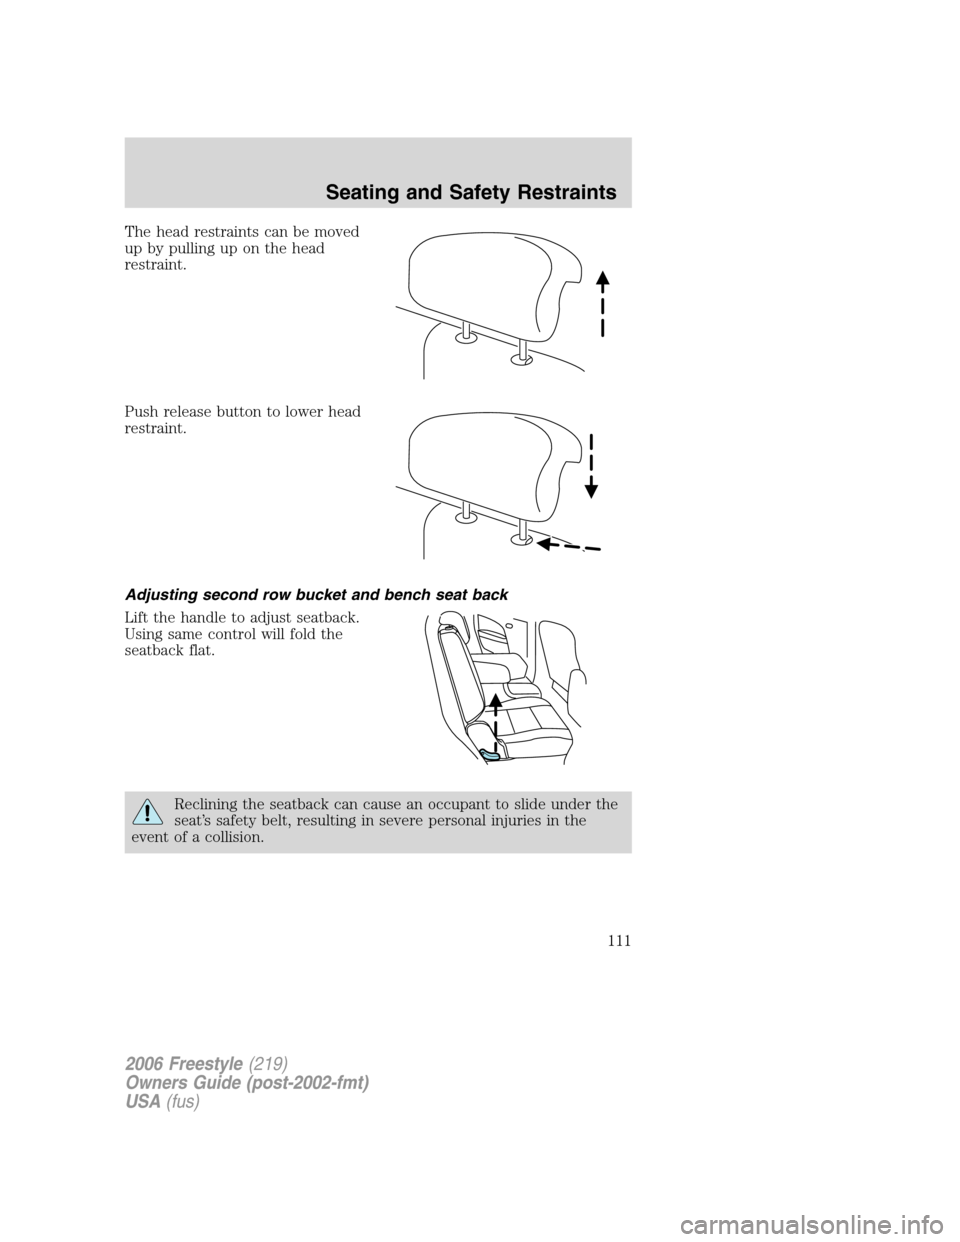 FORD FREESTYLE 2006 1.G Owners Manual The head restraints can be moved
up by pulling up on the head
restraint.
Push release button to lower head
restraint.
Adjusting second row bucket and bench seat back
Lift the handle to adjust seatback